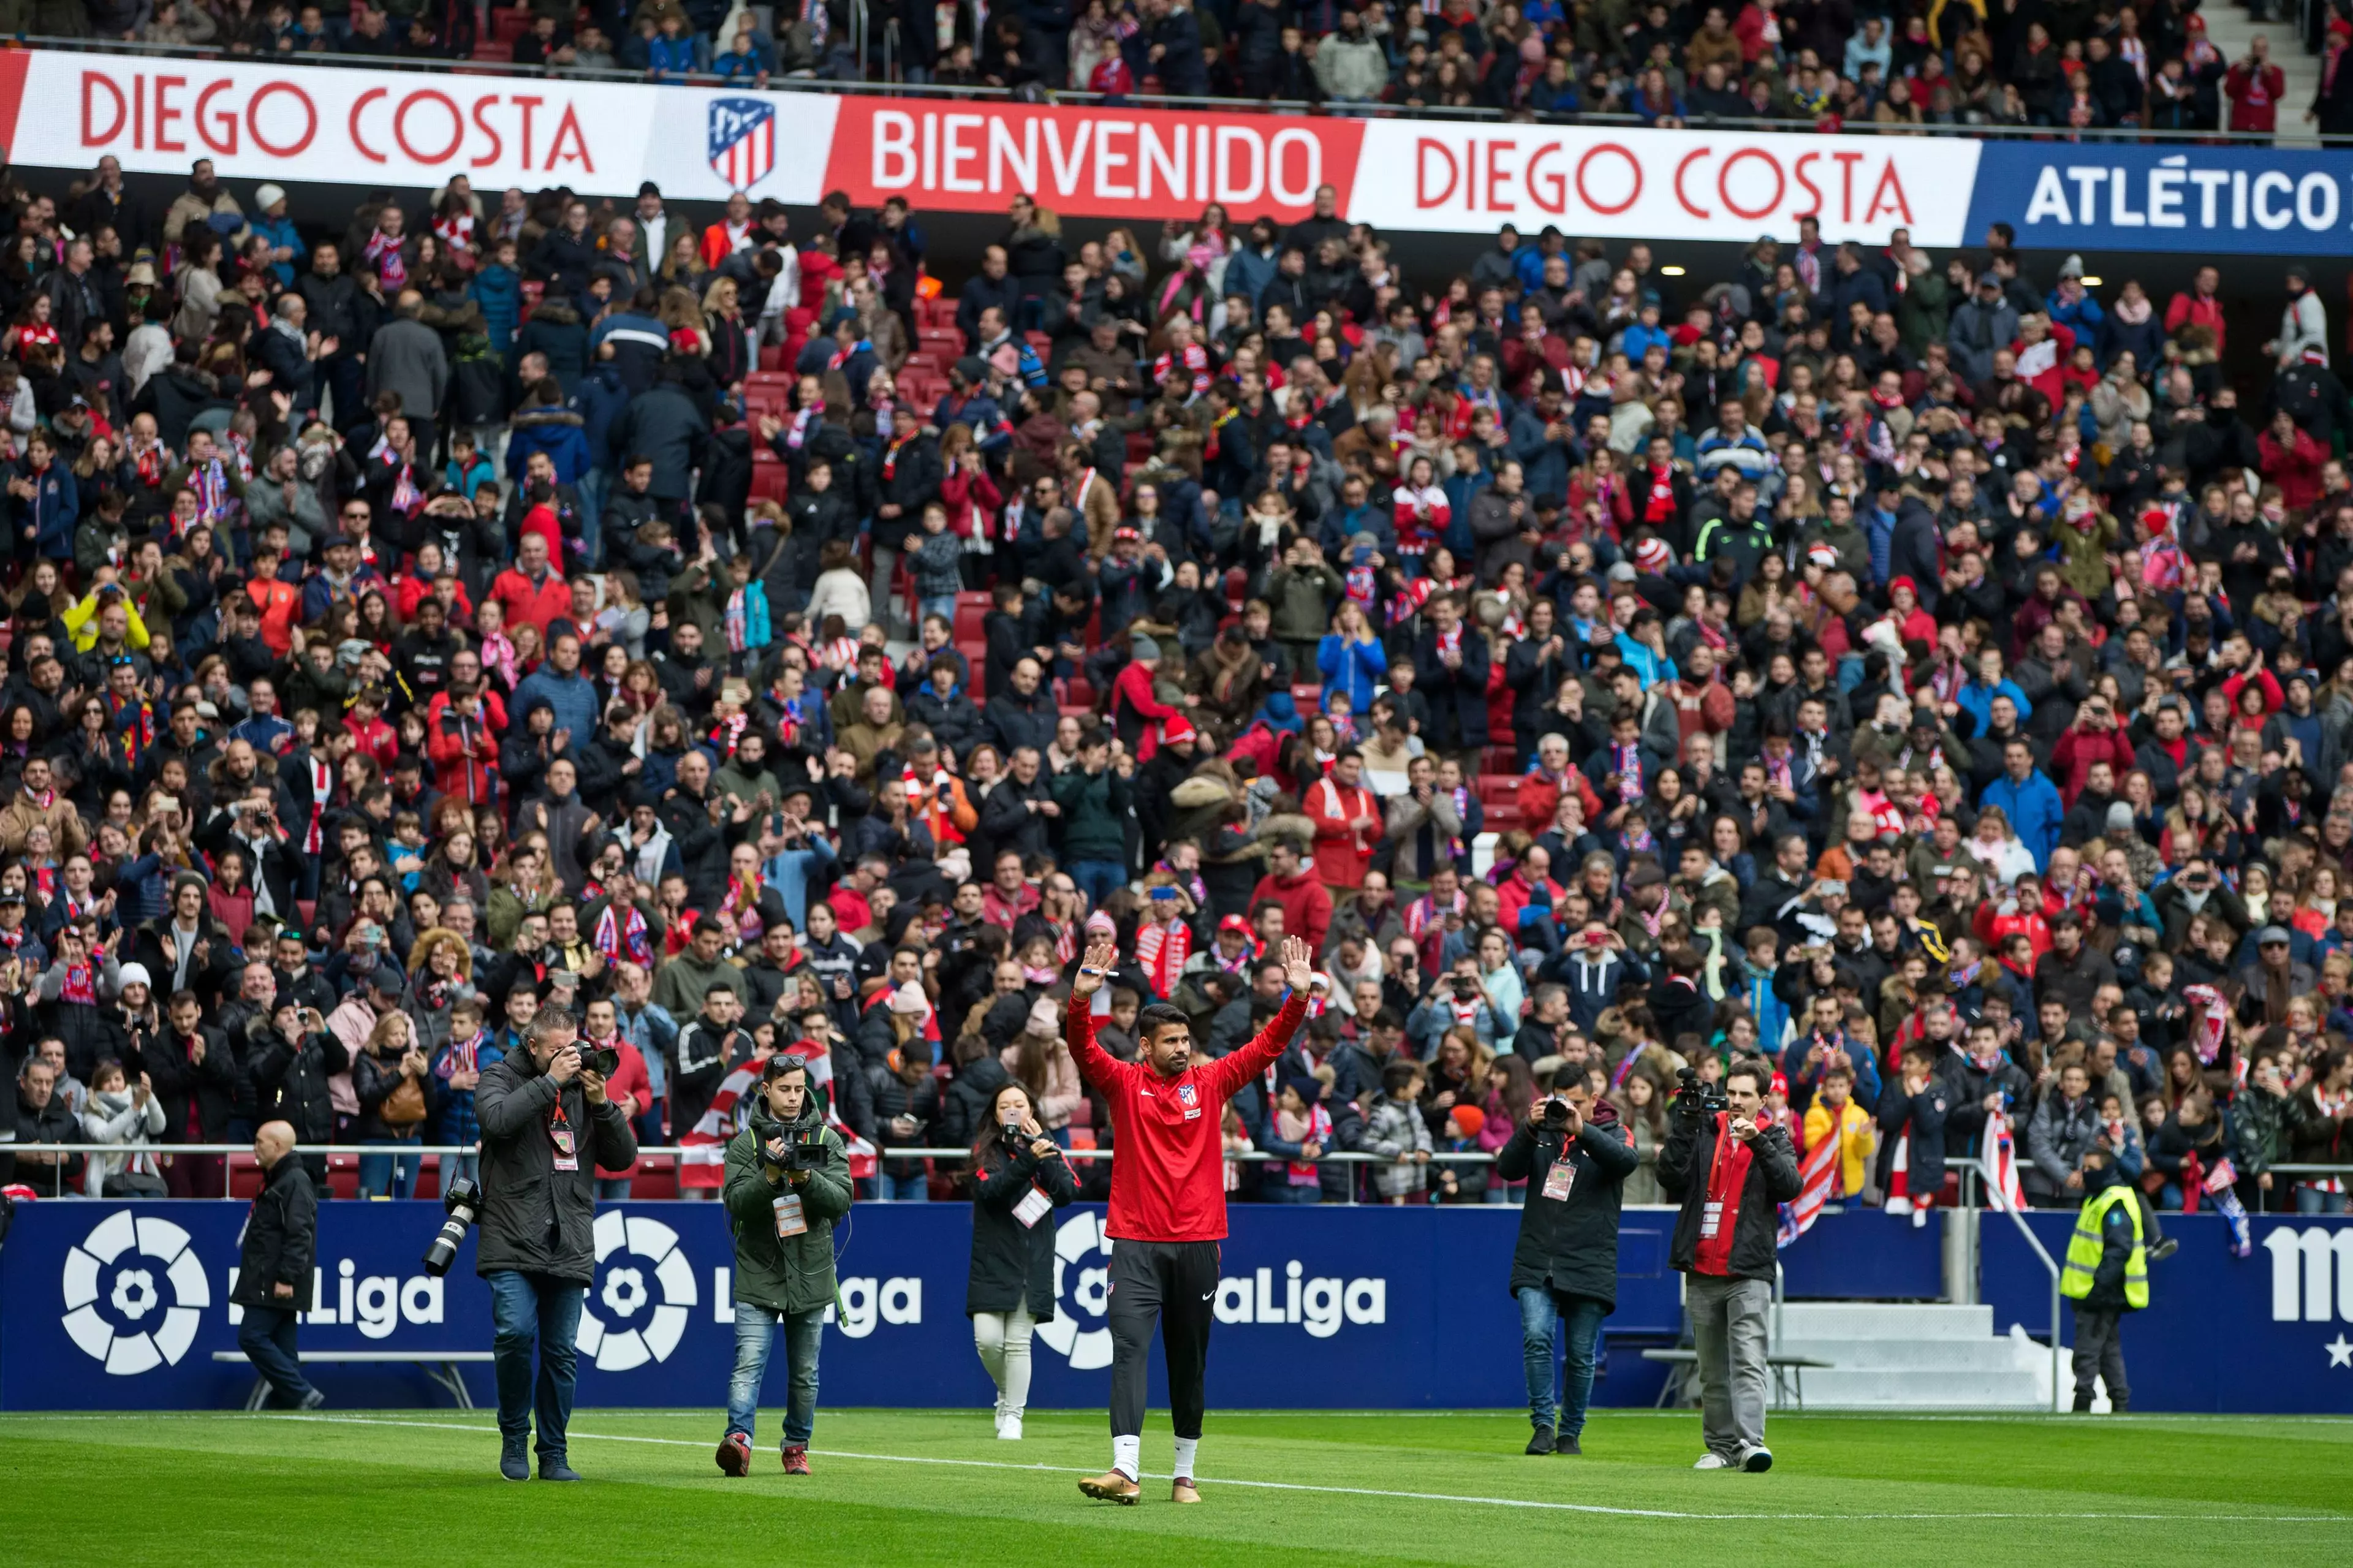 Costa got a good reception from the fans when he was unveiled earlier this week. Image: PA Images.